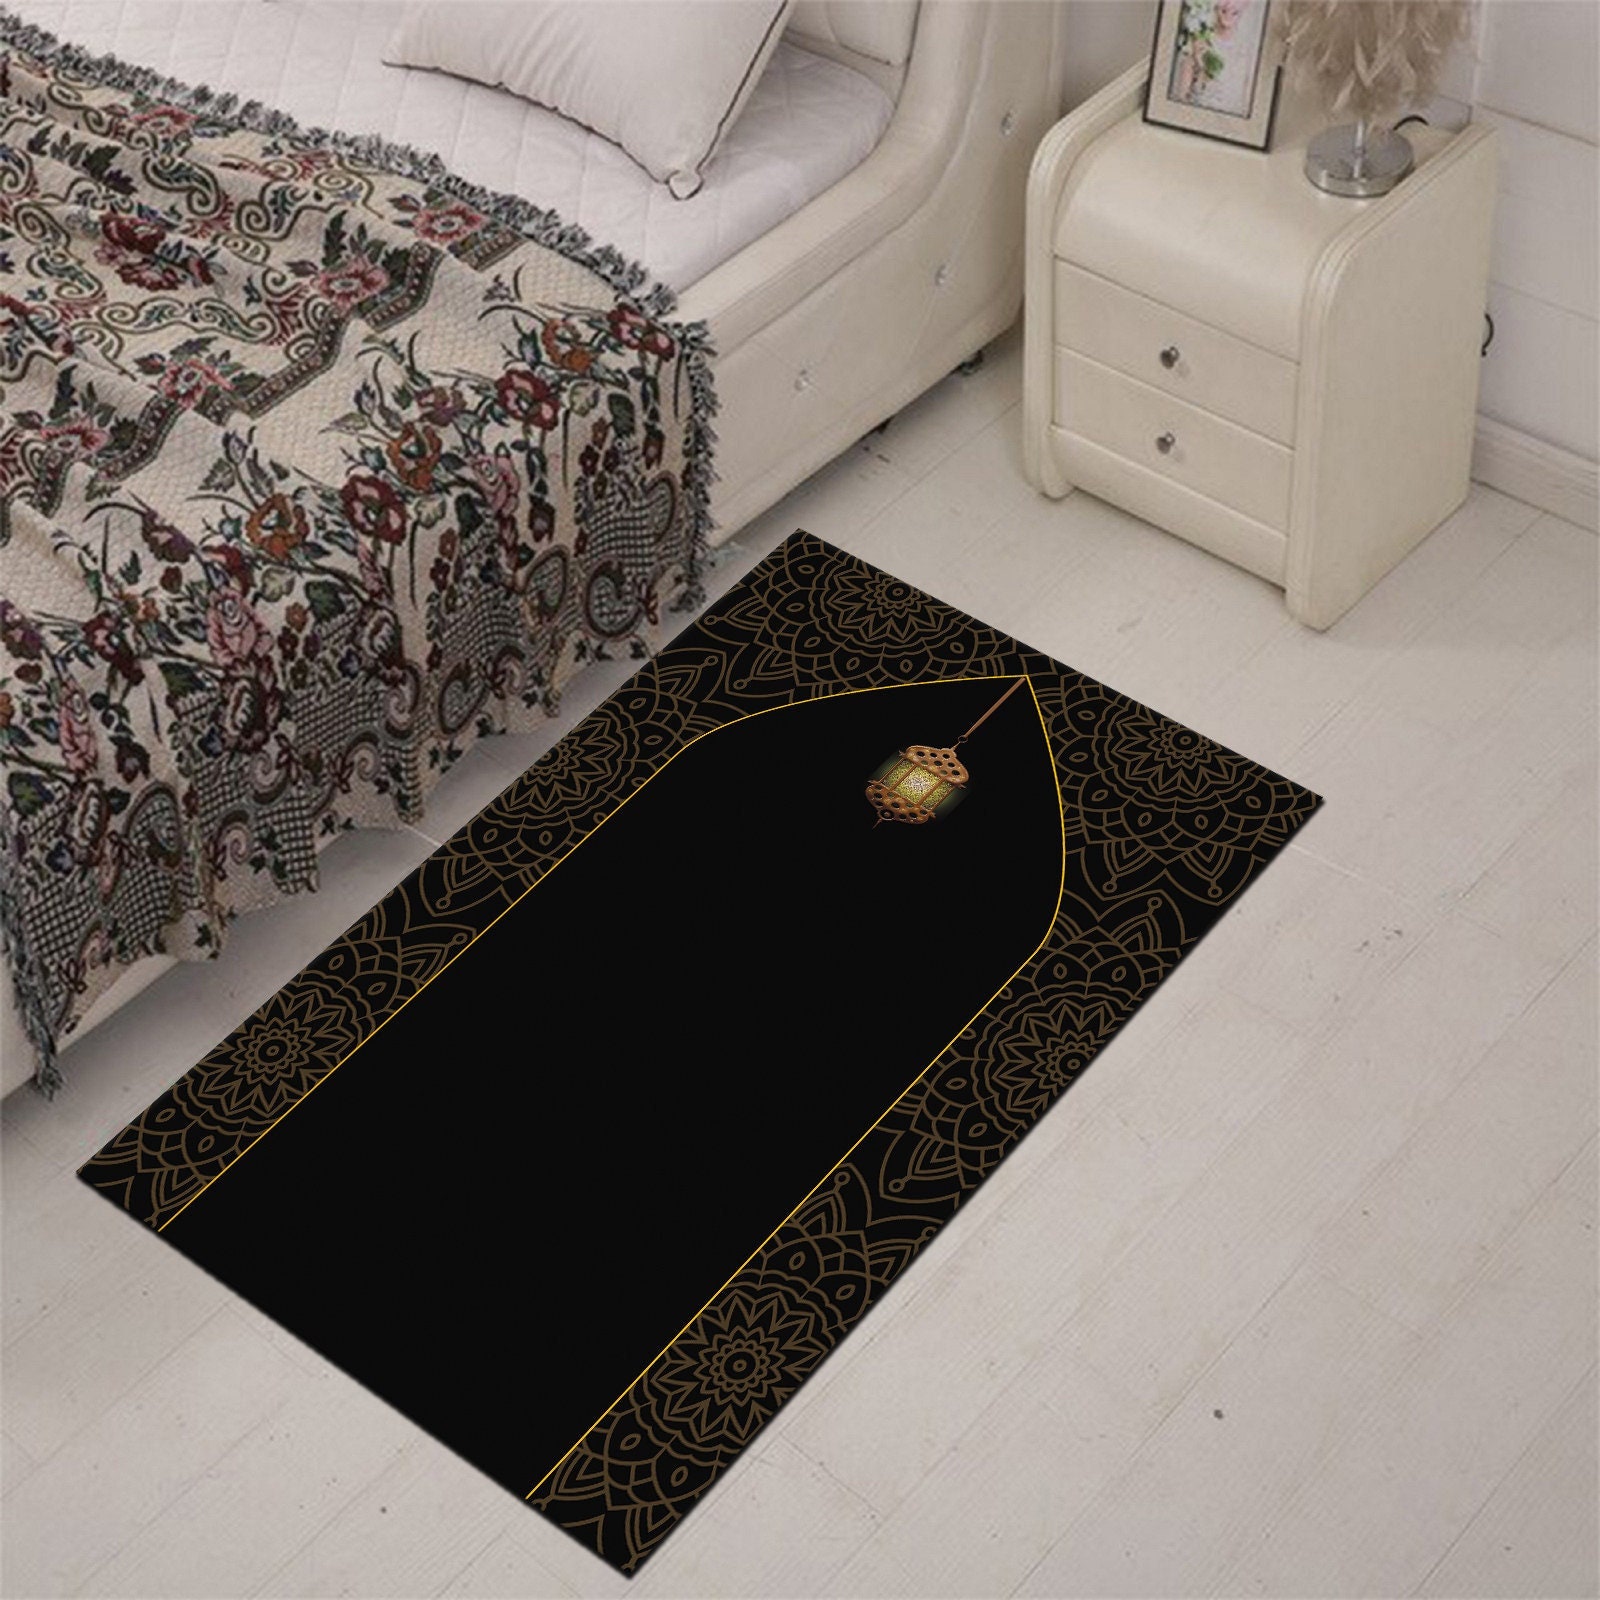 What is it with cats and prayer mats? : r/islam